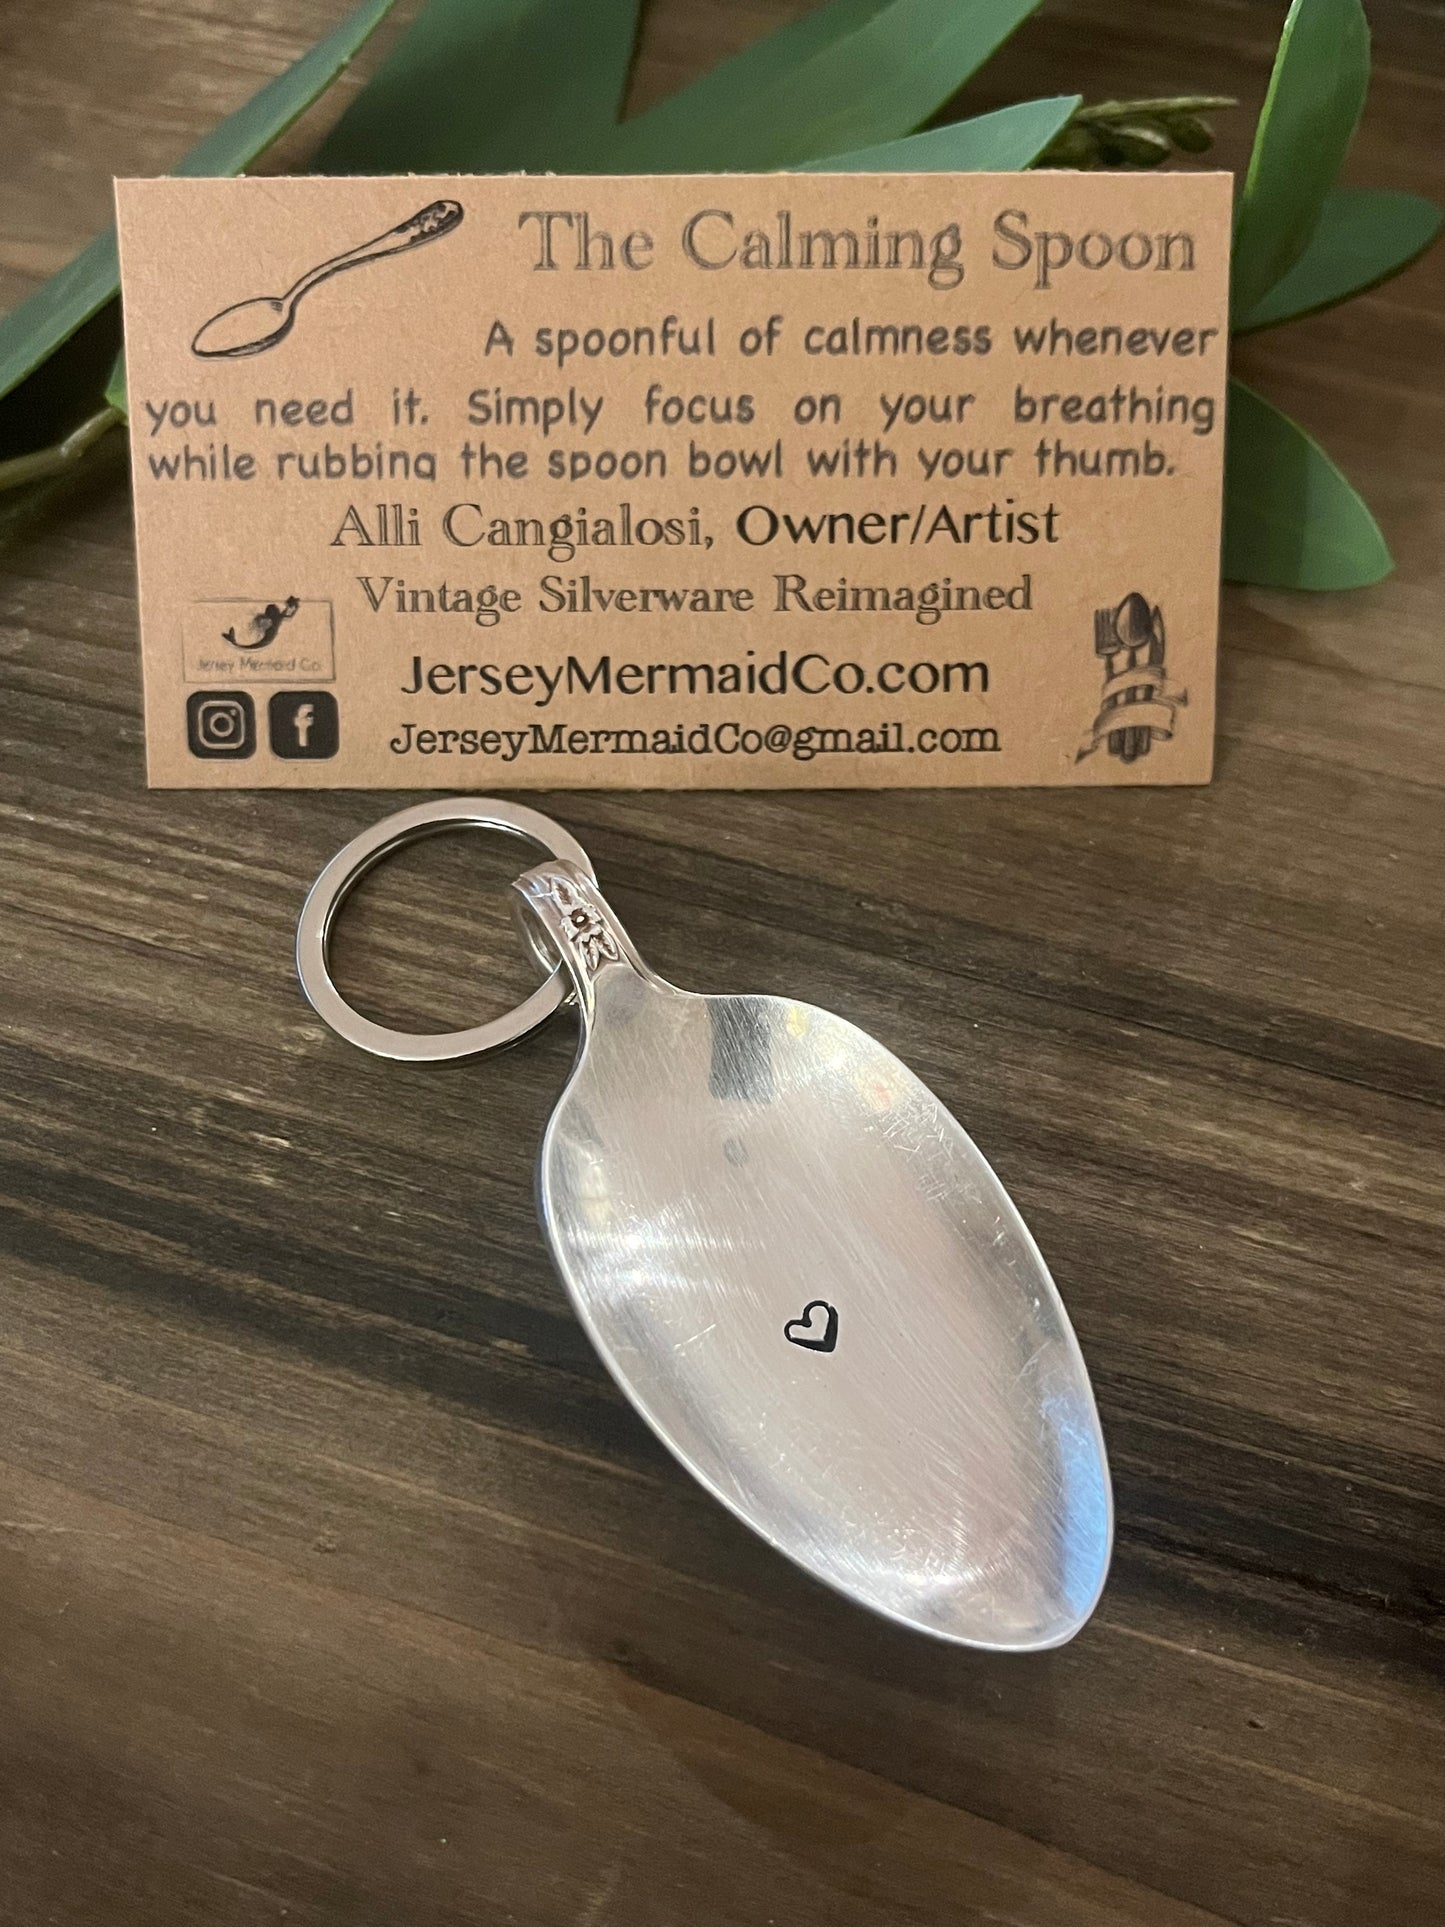 Calming Spoon Key Chain with tassel - Stamped with a heart